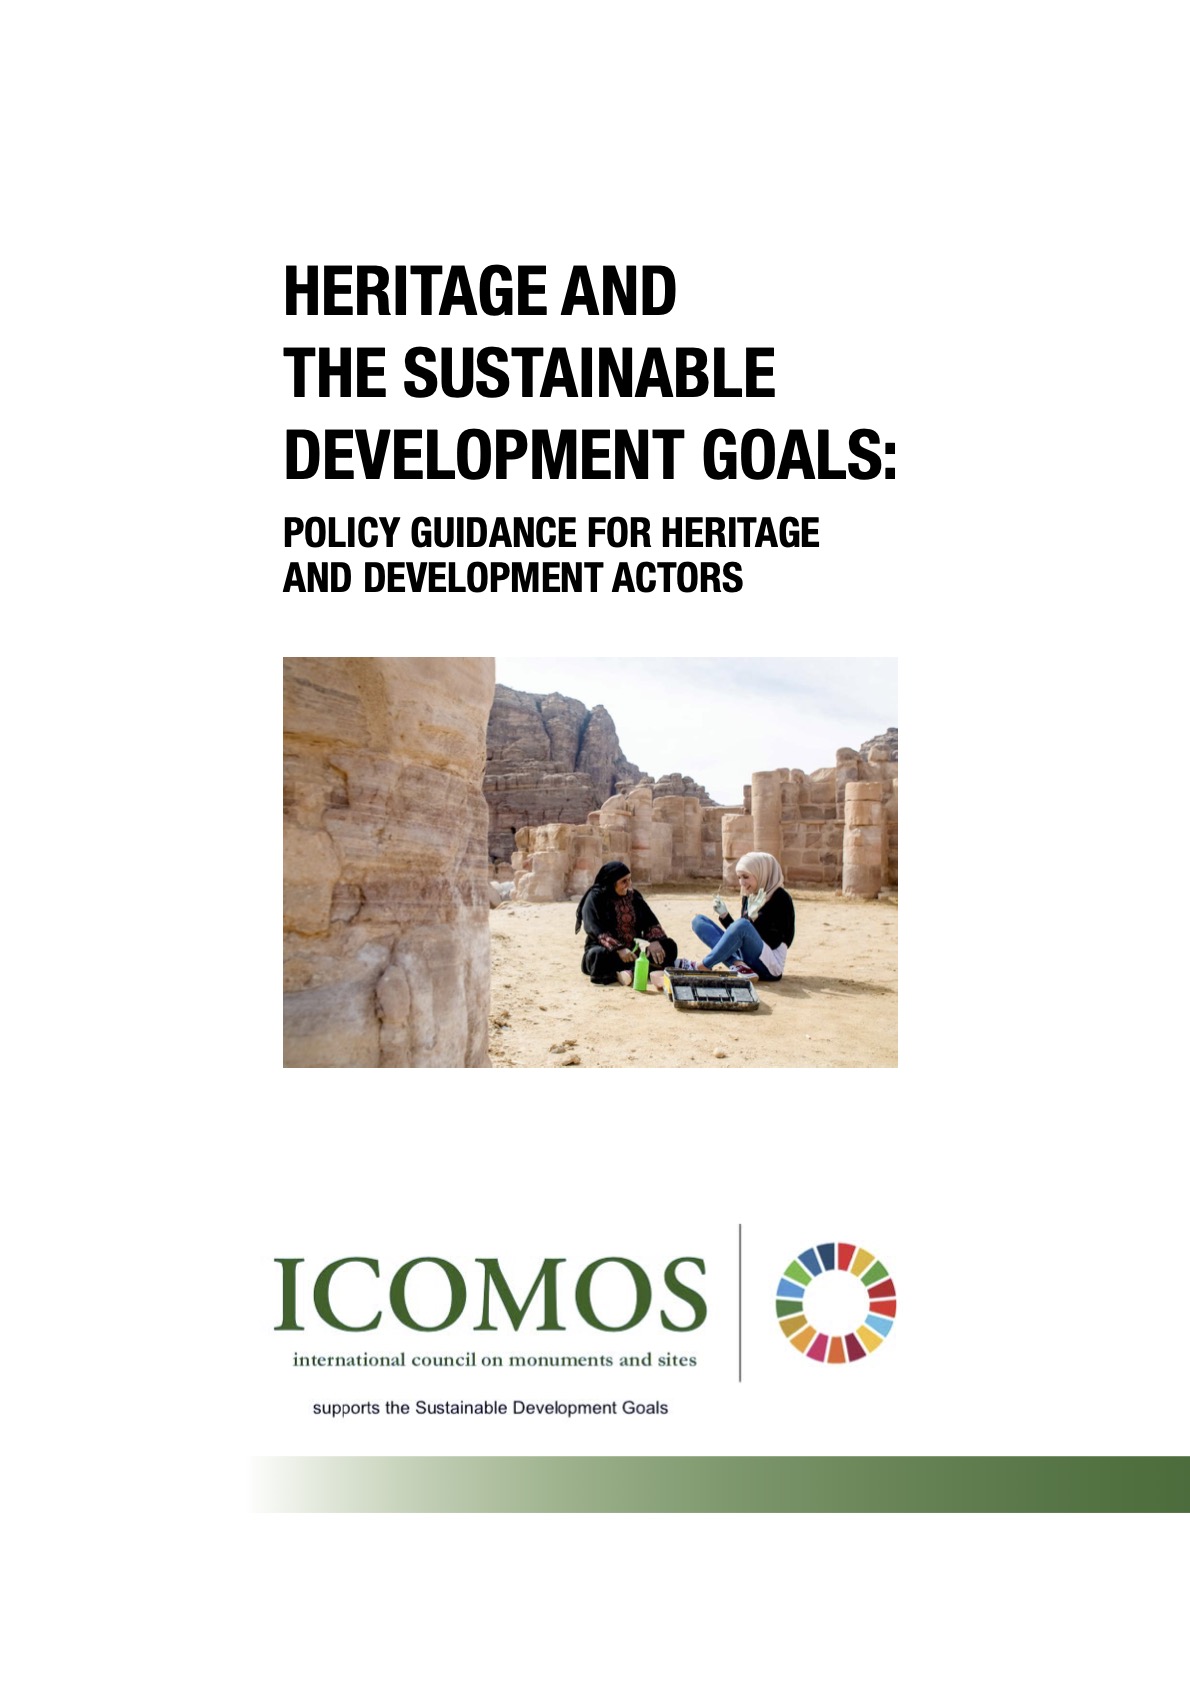 HERITAGE AND THE SUSTAINABLE DEVELOPMENT GOALS: POLICY GUIDANCE FOR HERITAGE AND DEVELOPMENT ACTORS